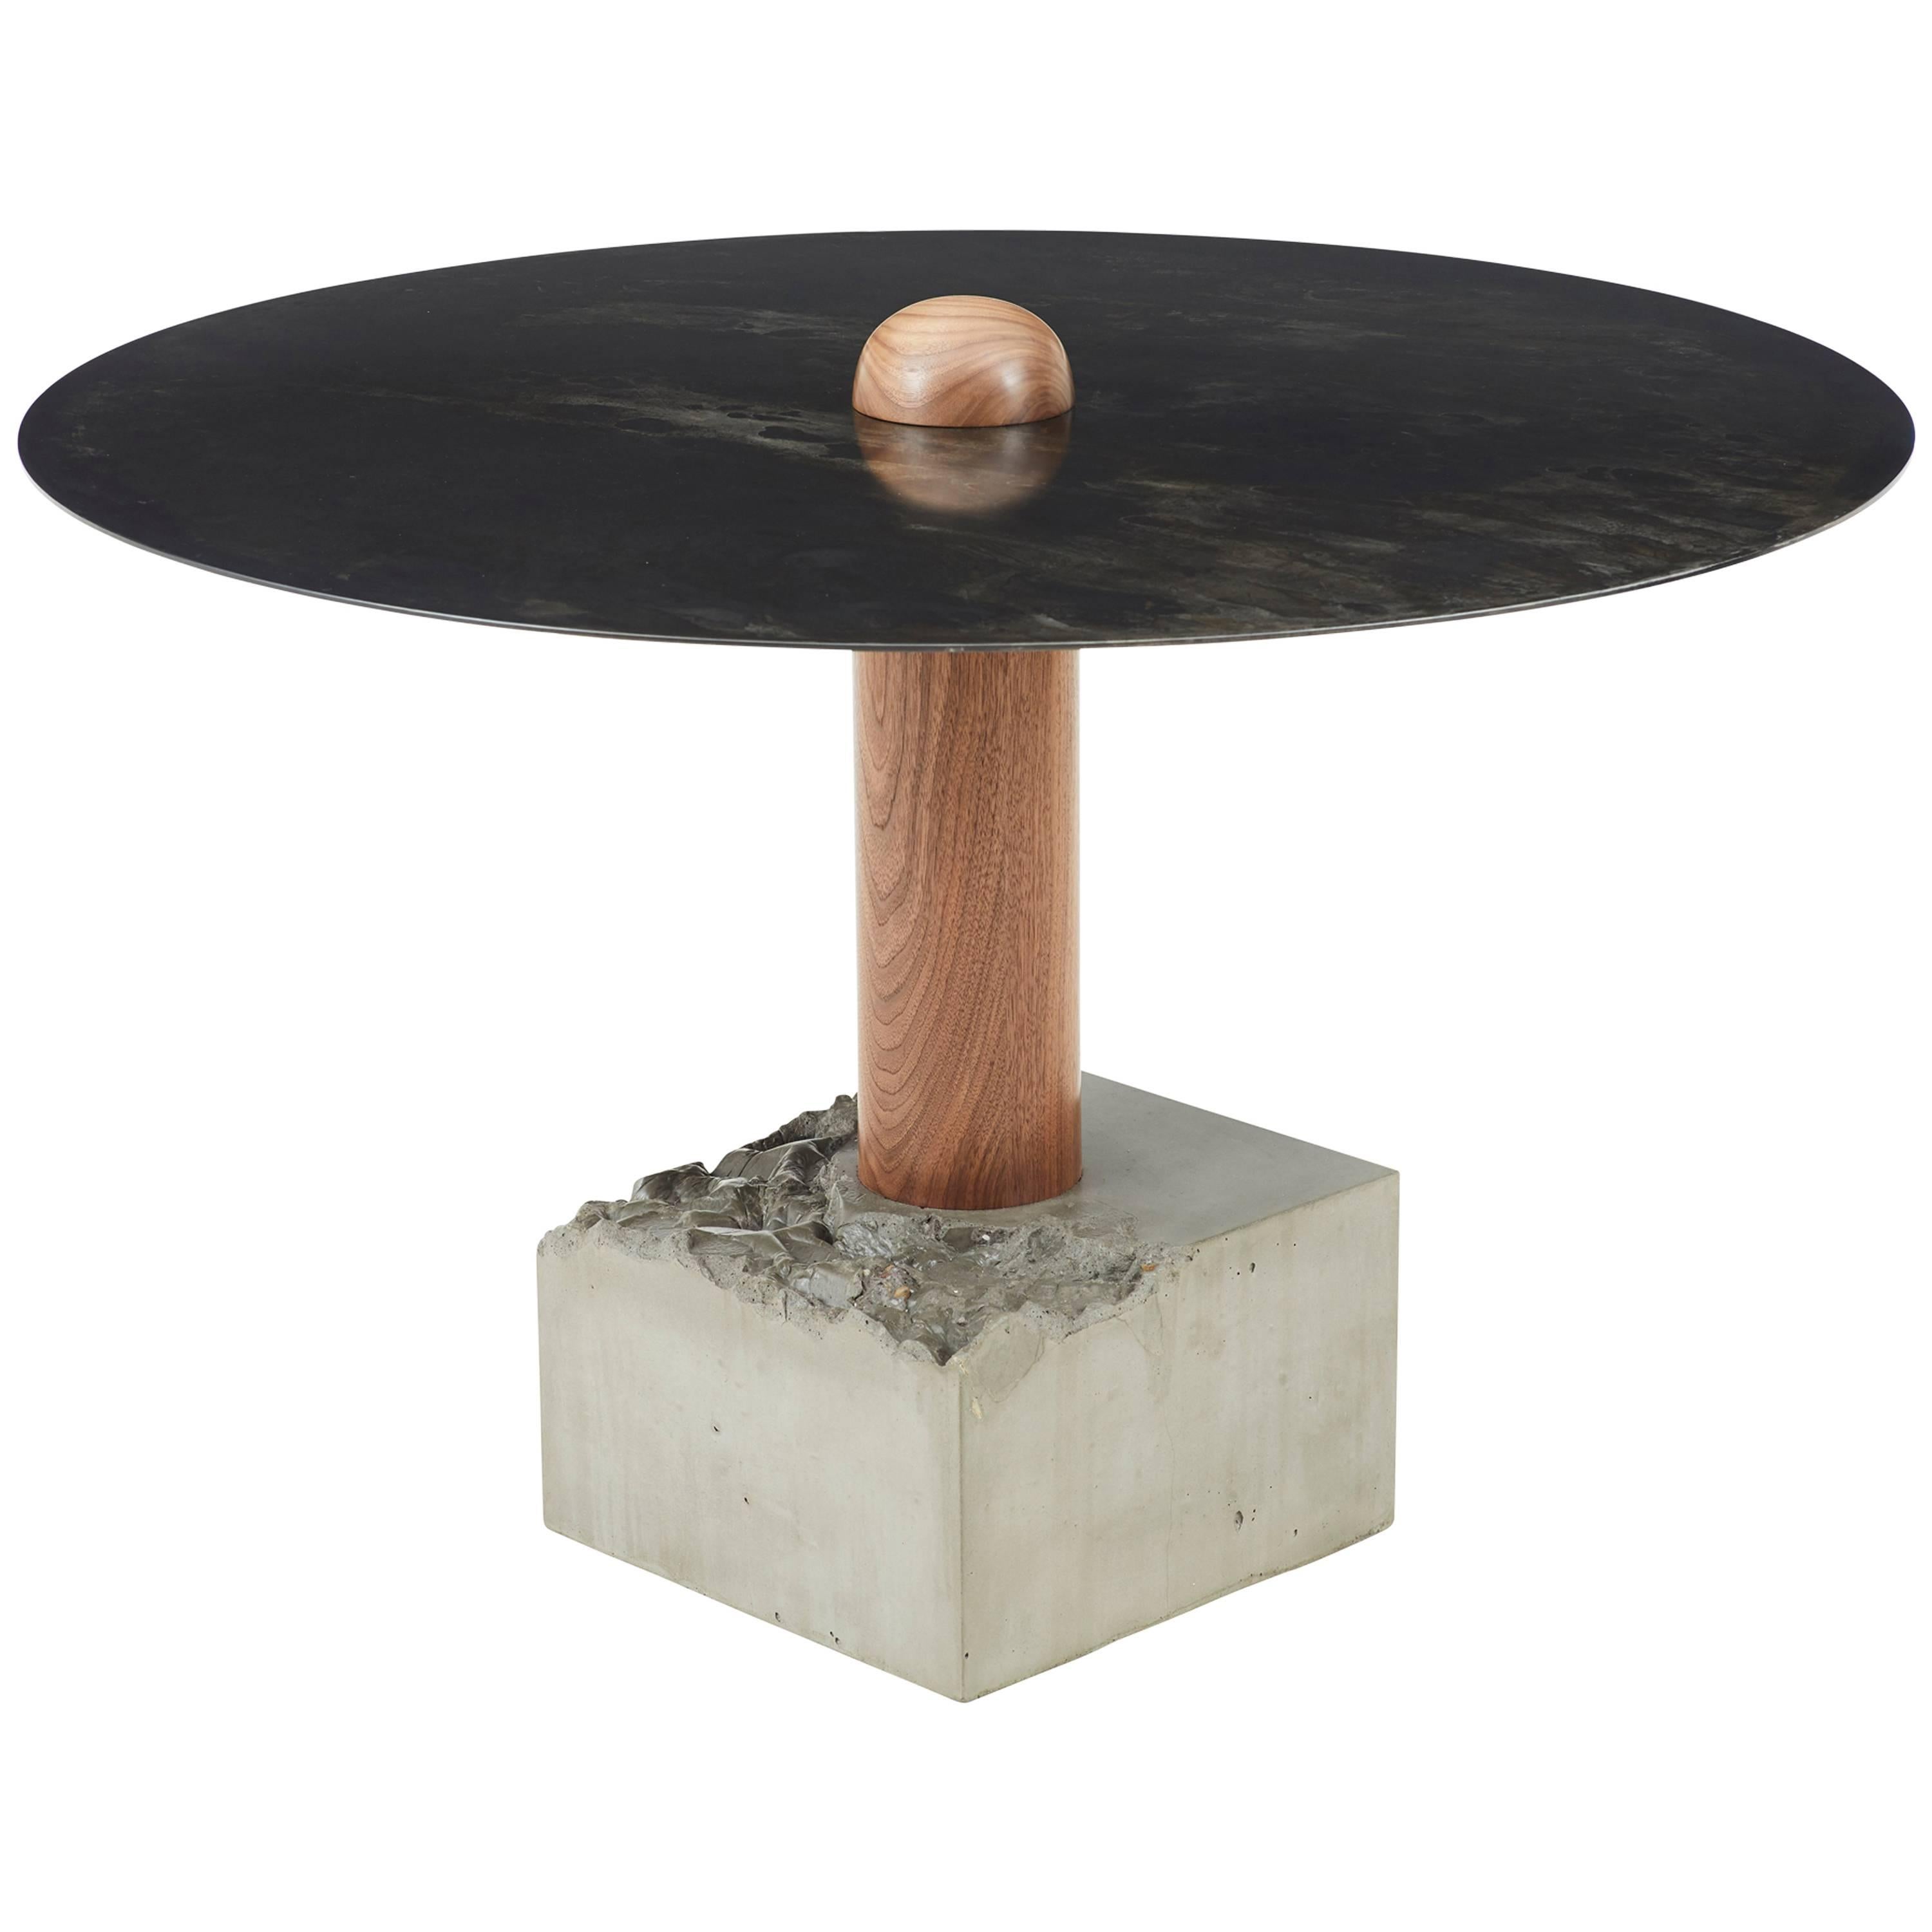 RT-1 Round Dining Table with Steel Top, Solid Walnut Wood Post and Concrete Base